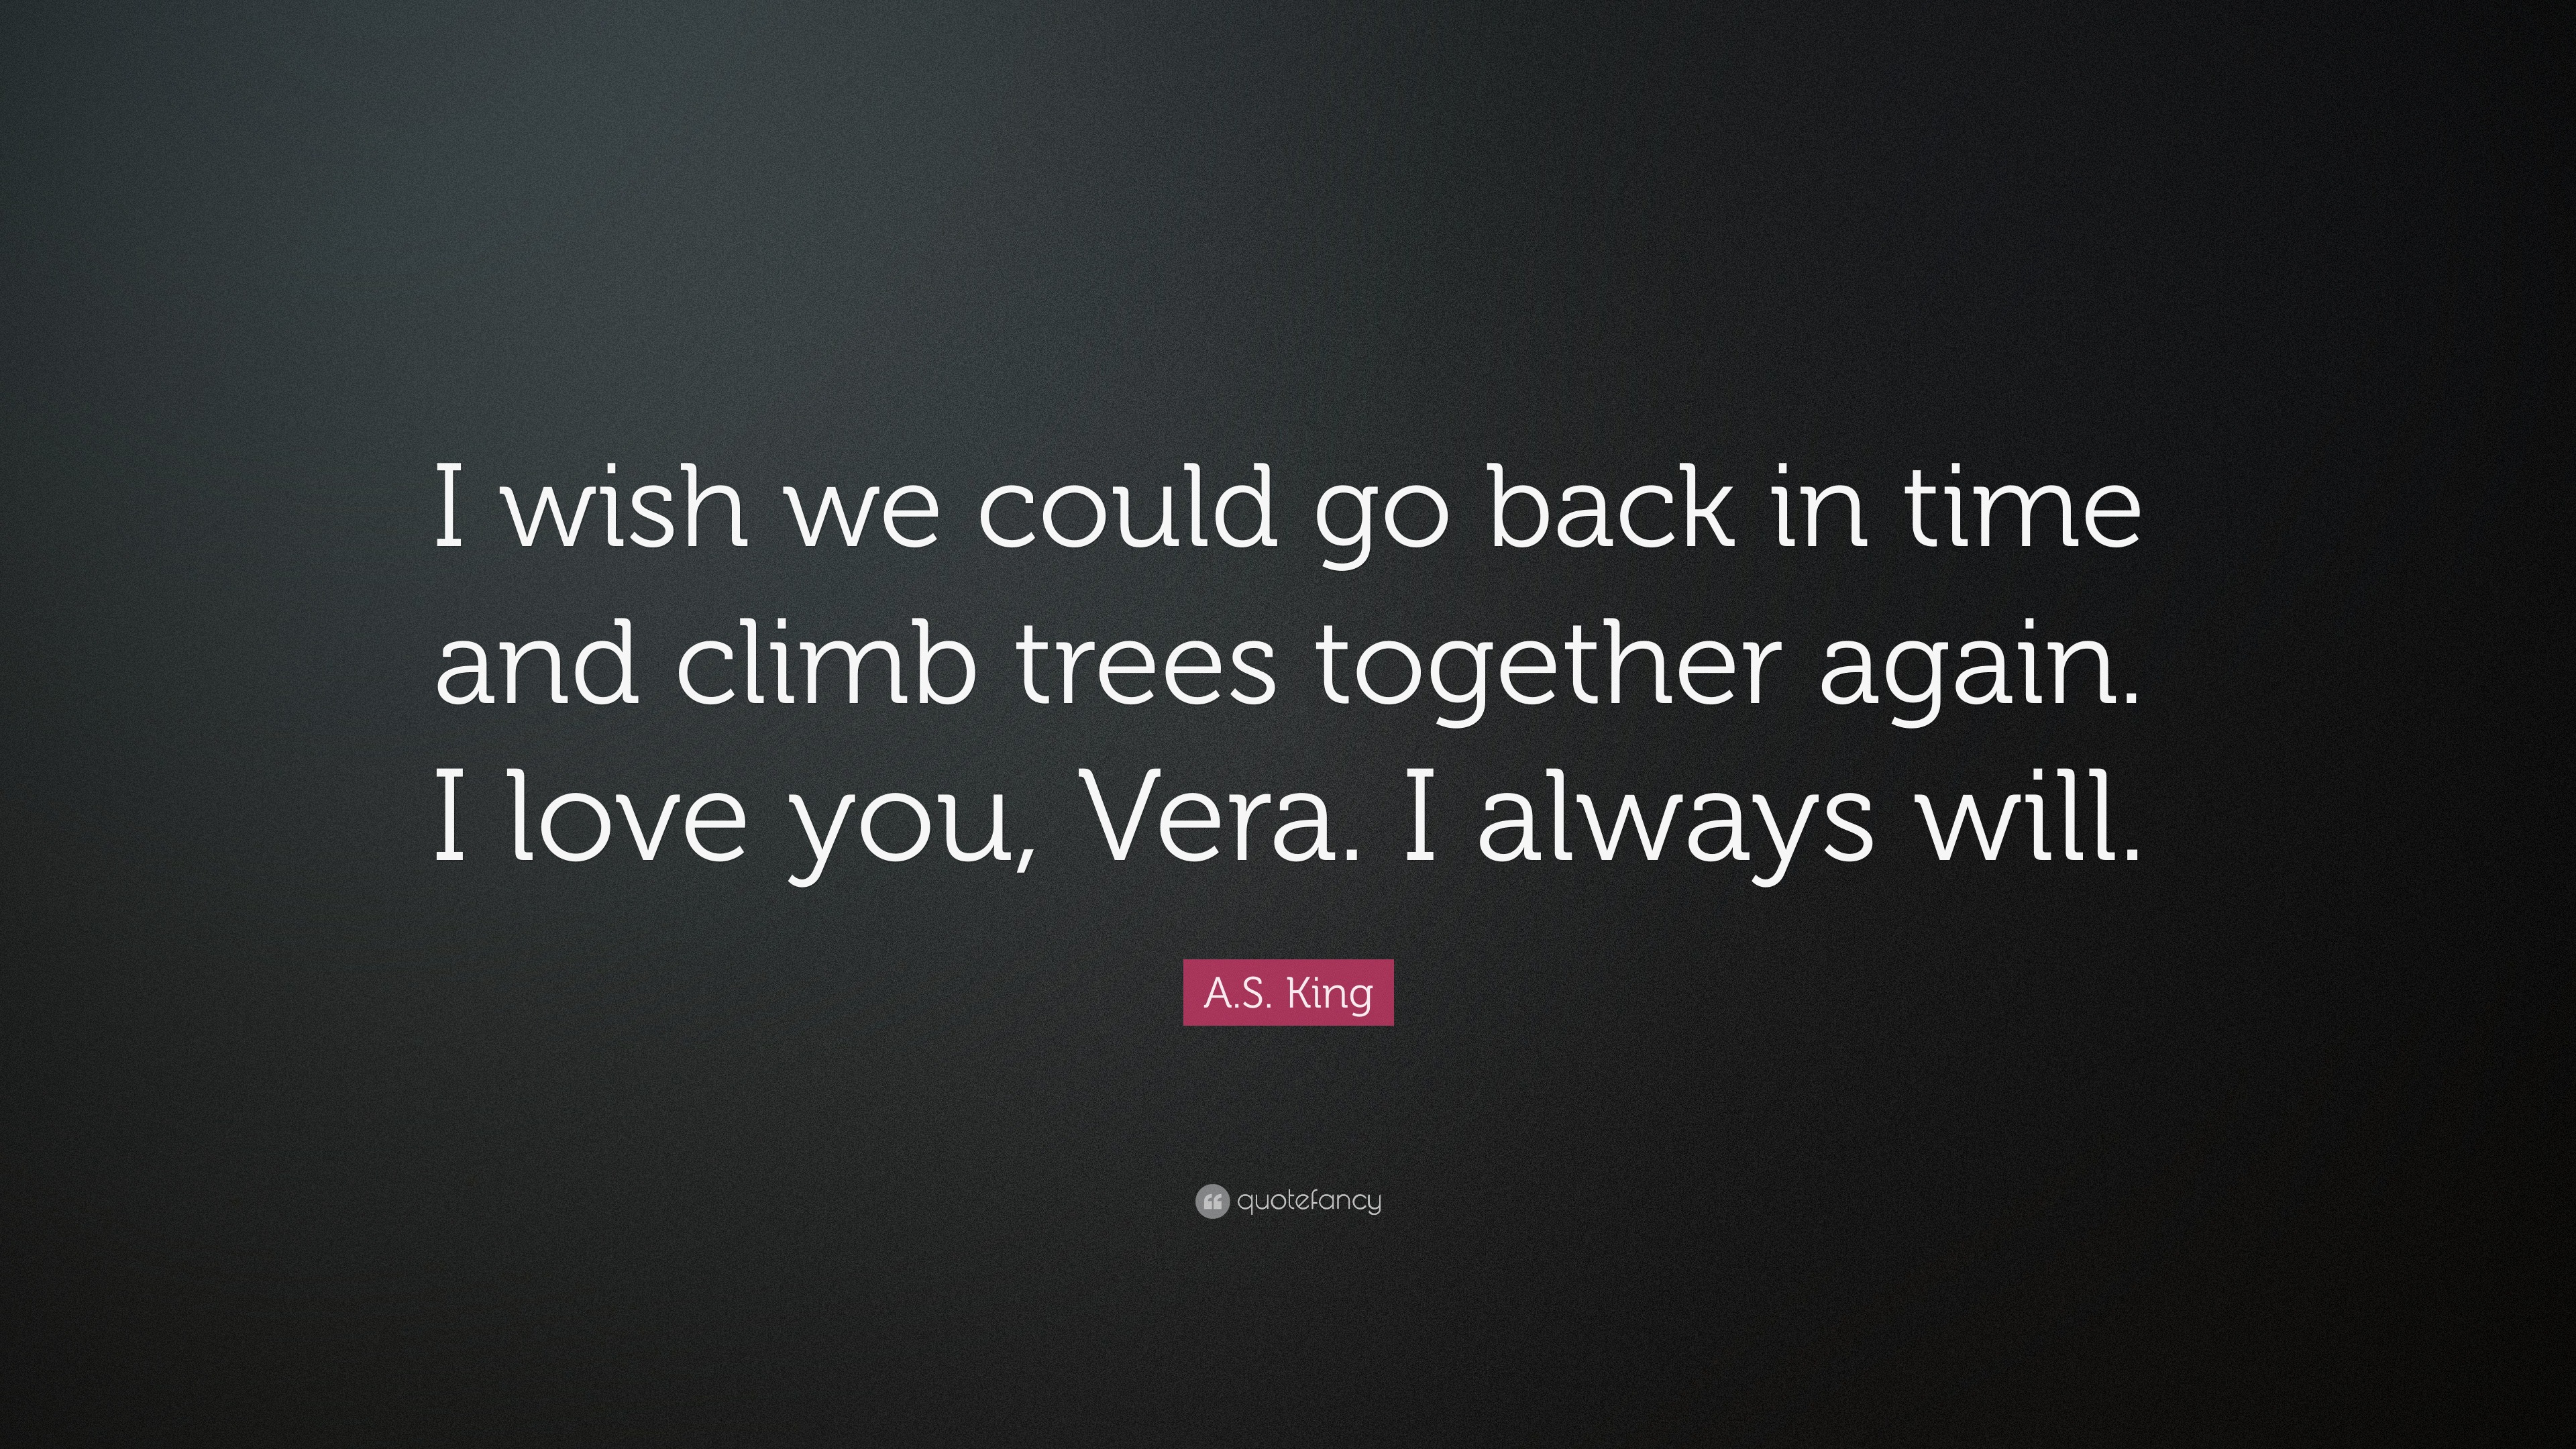 A S King Quote “I wish we could go back in time and climb trees